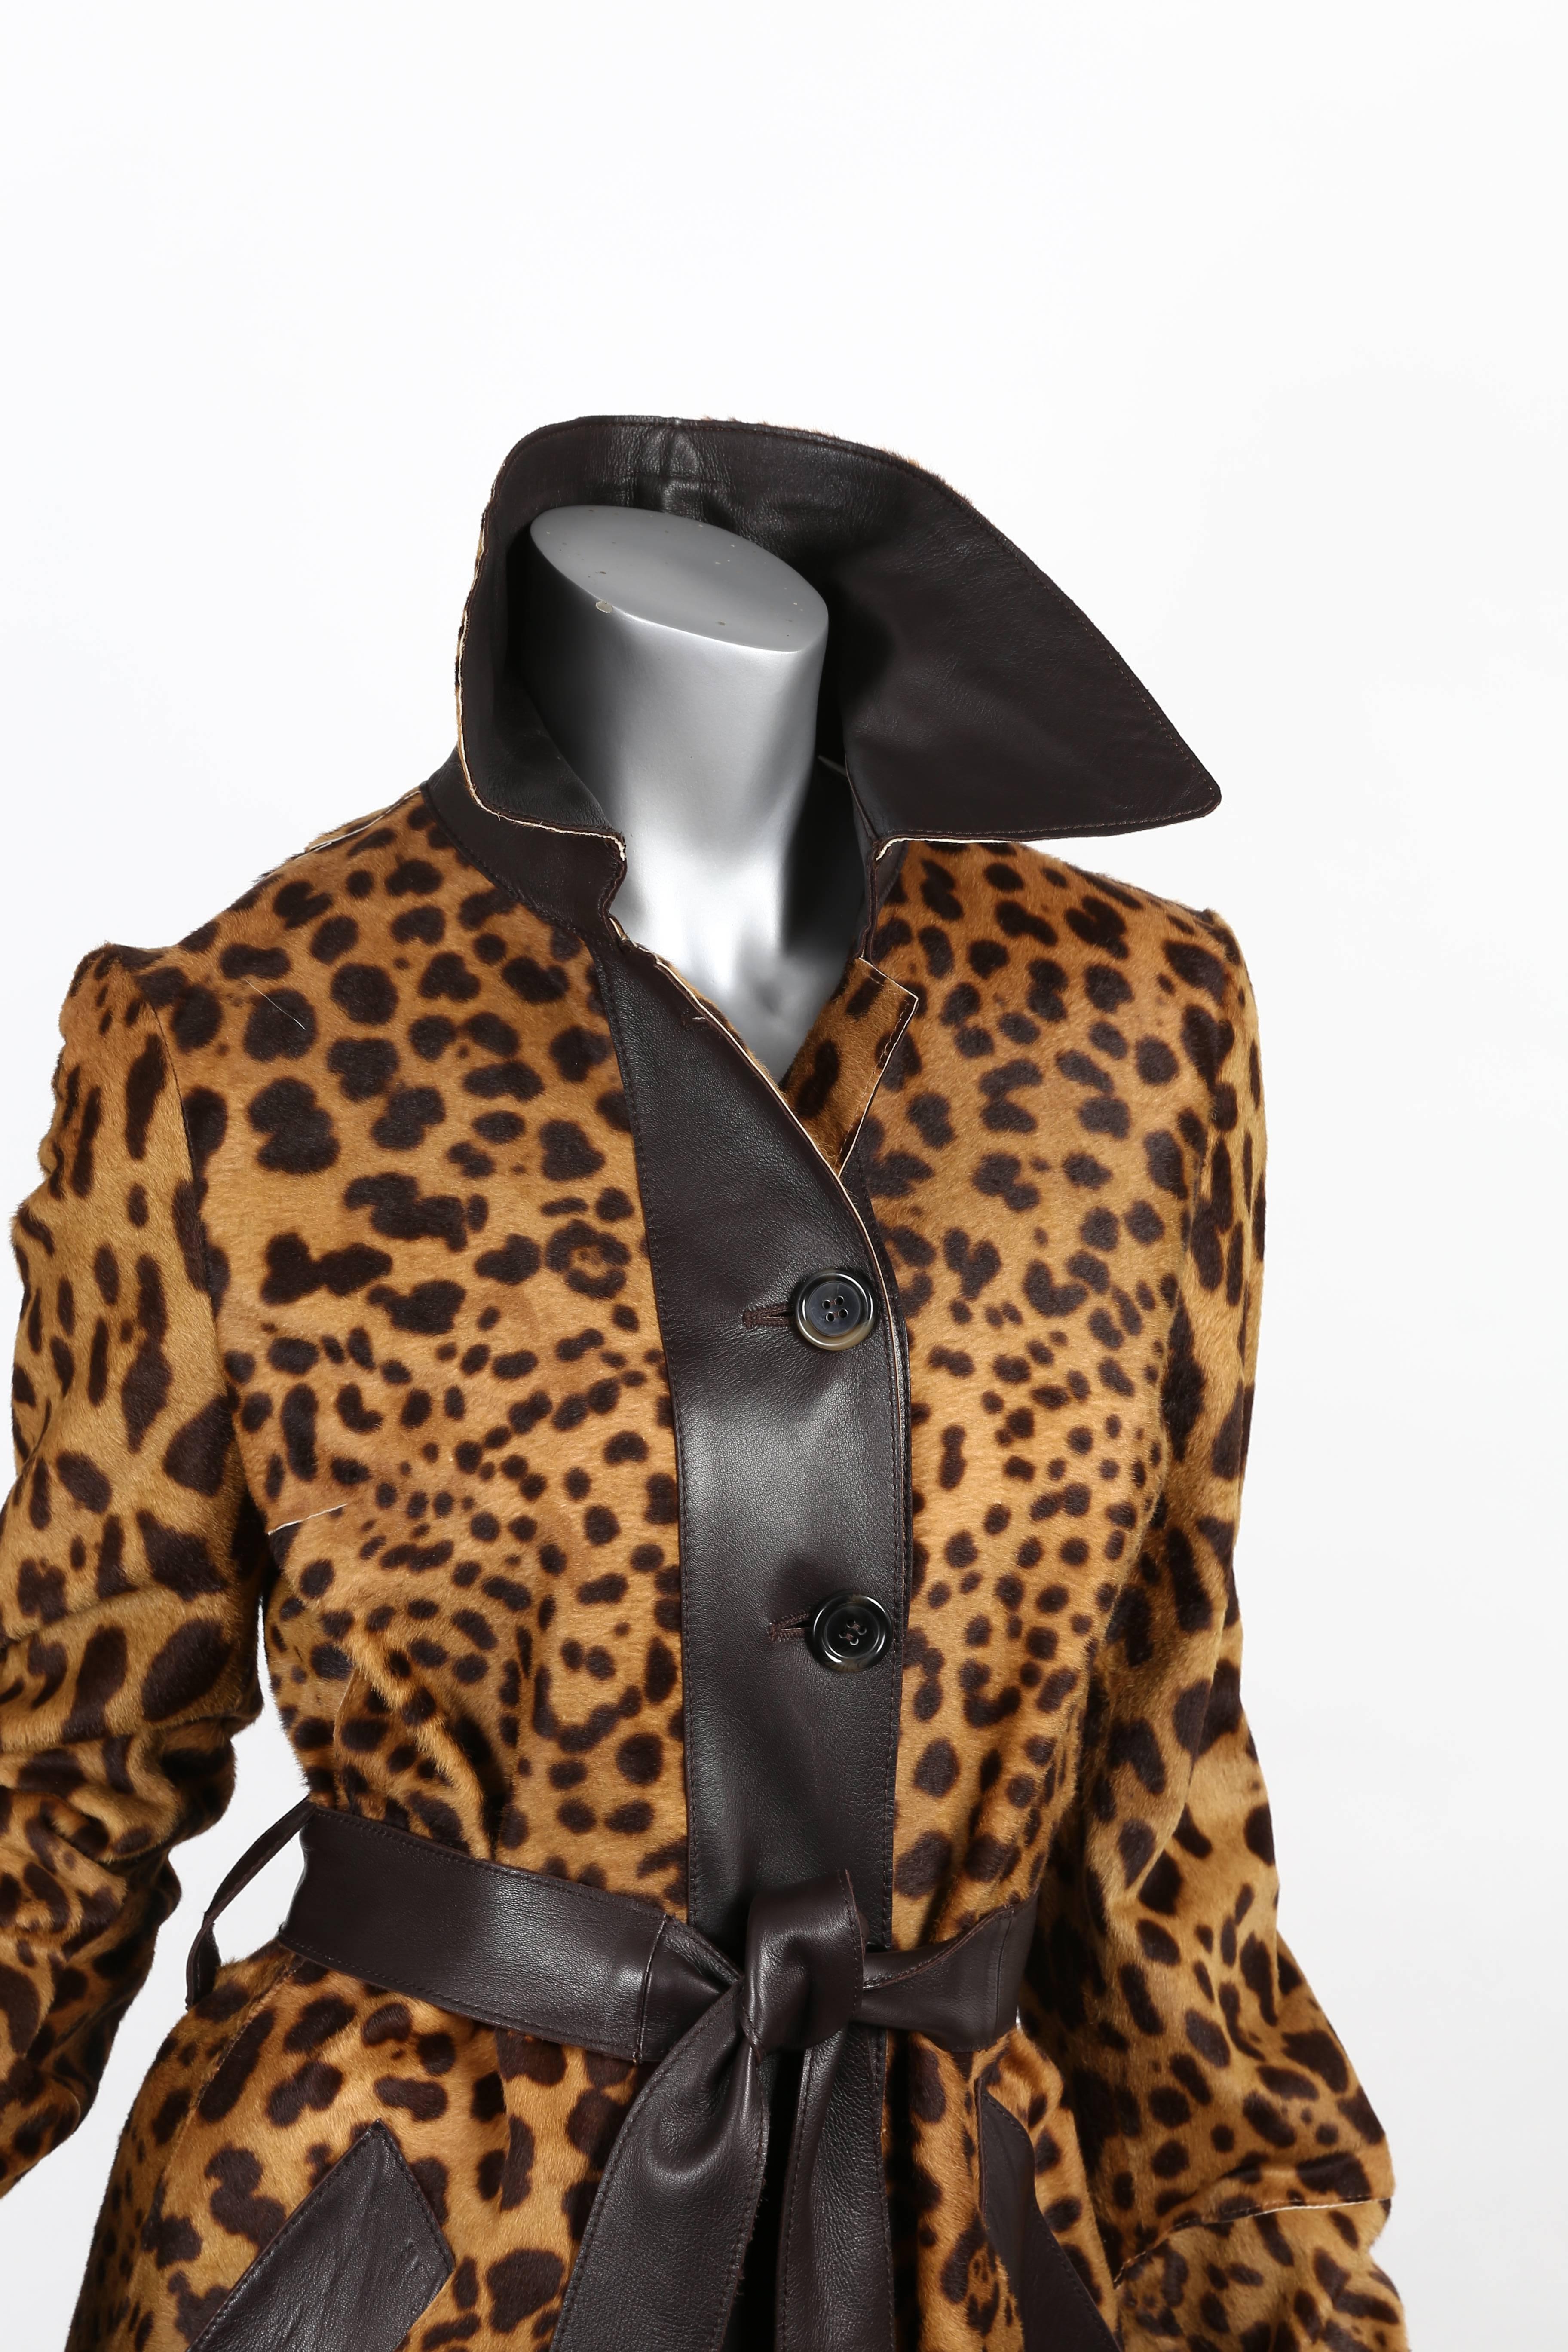 Dolce & Gabbana Leopard Print Pony skin Coat - Size 40 In Excellent Condition In Westhampton Beach, NY